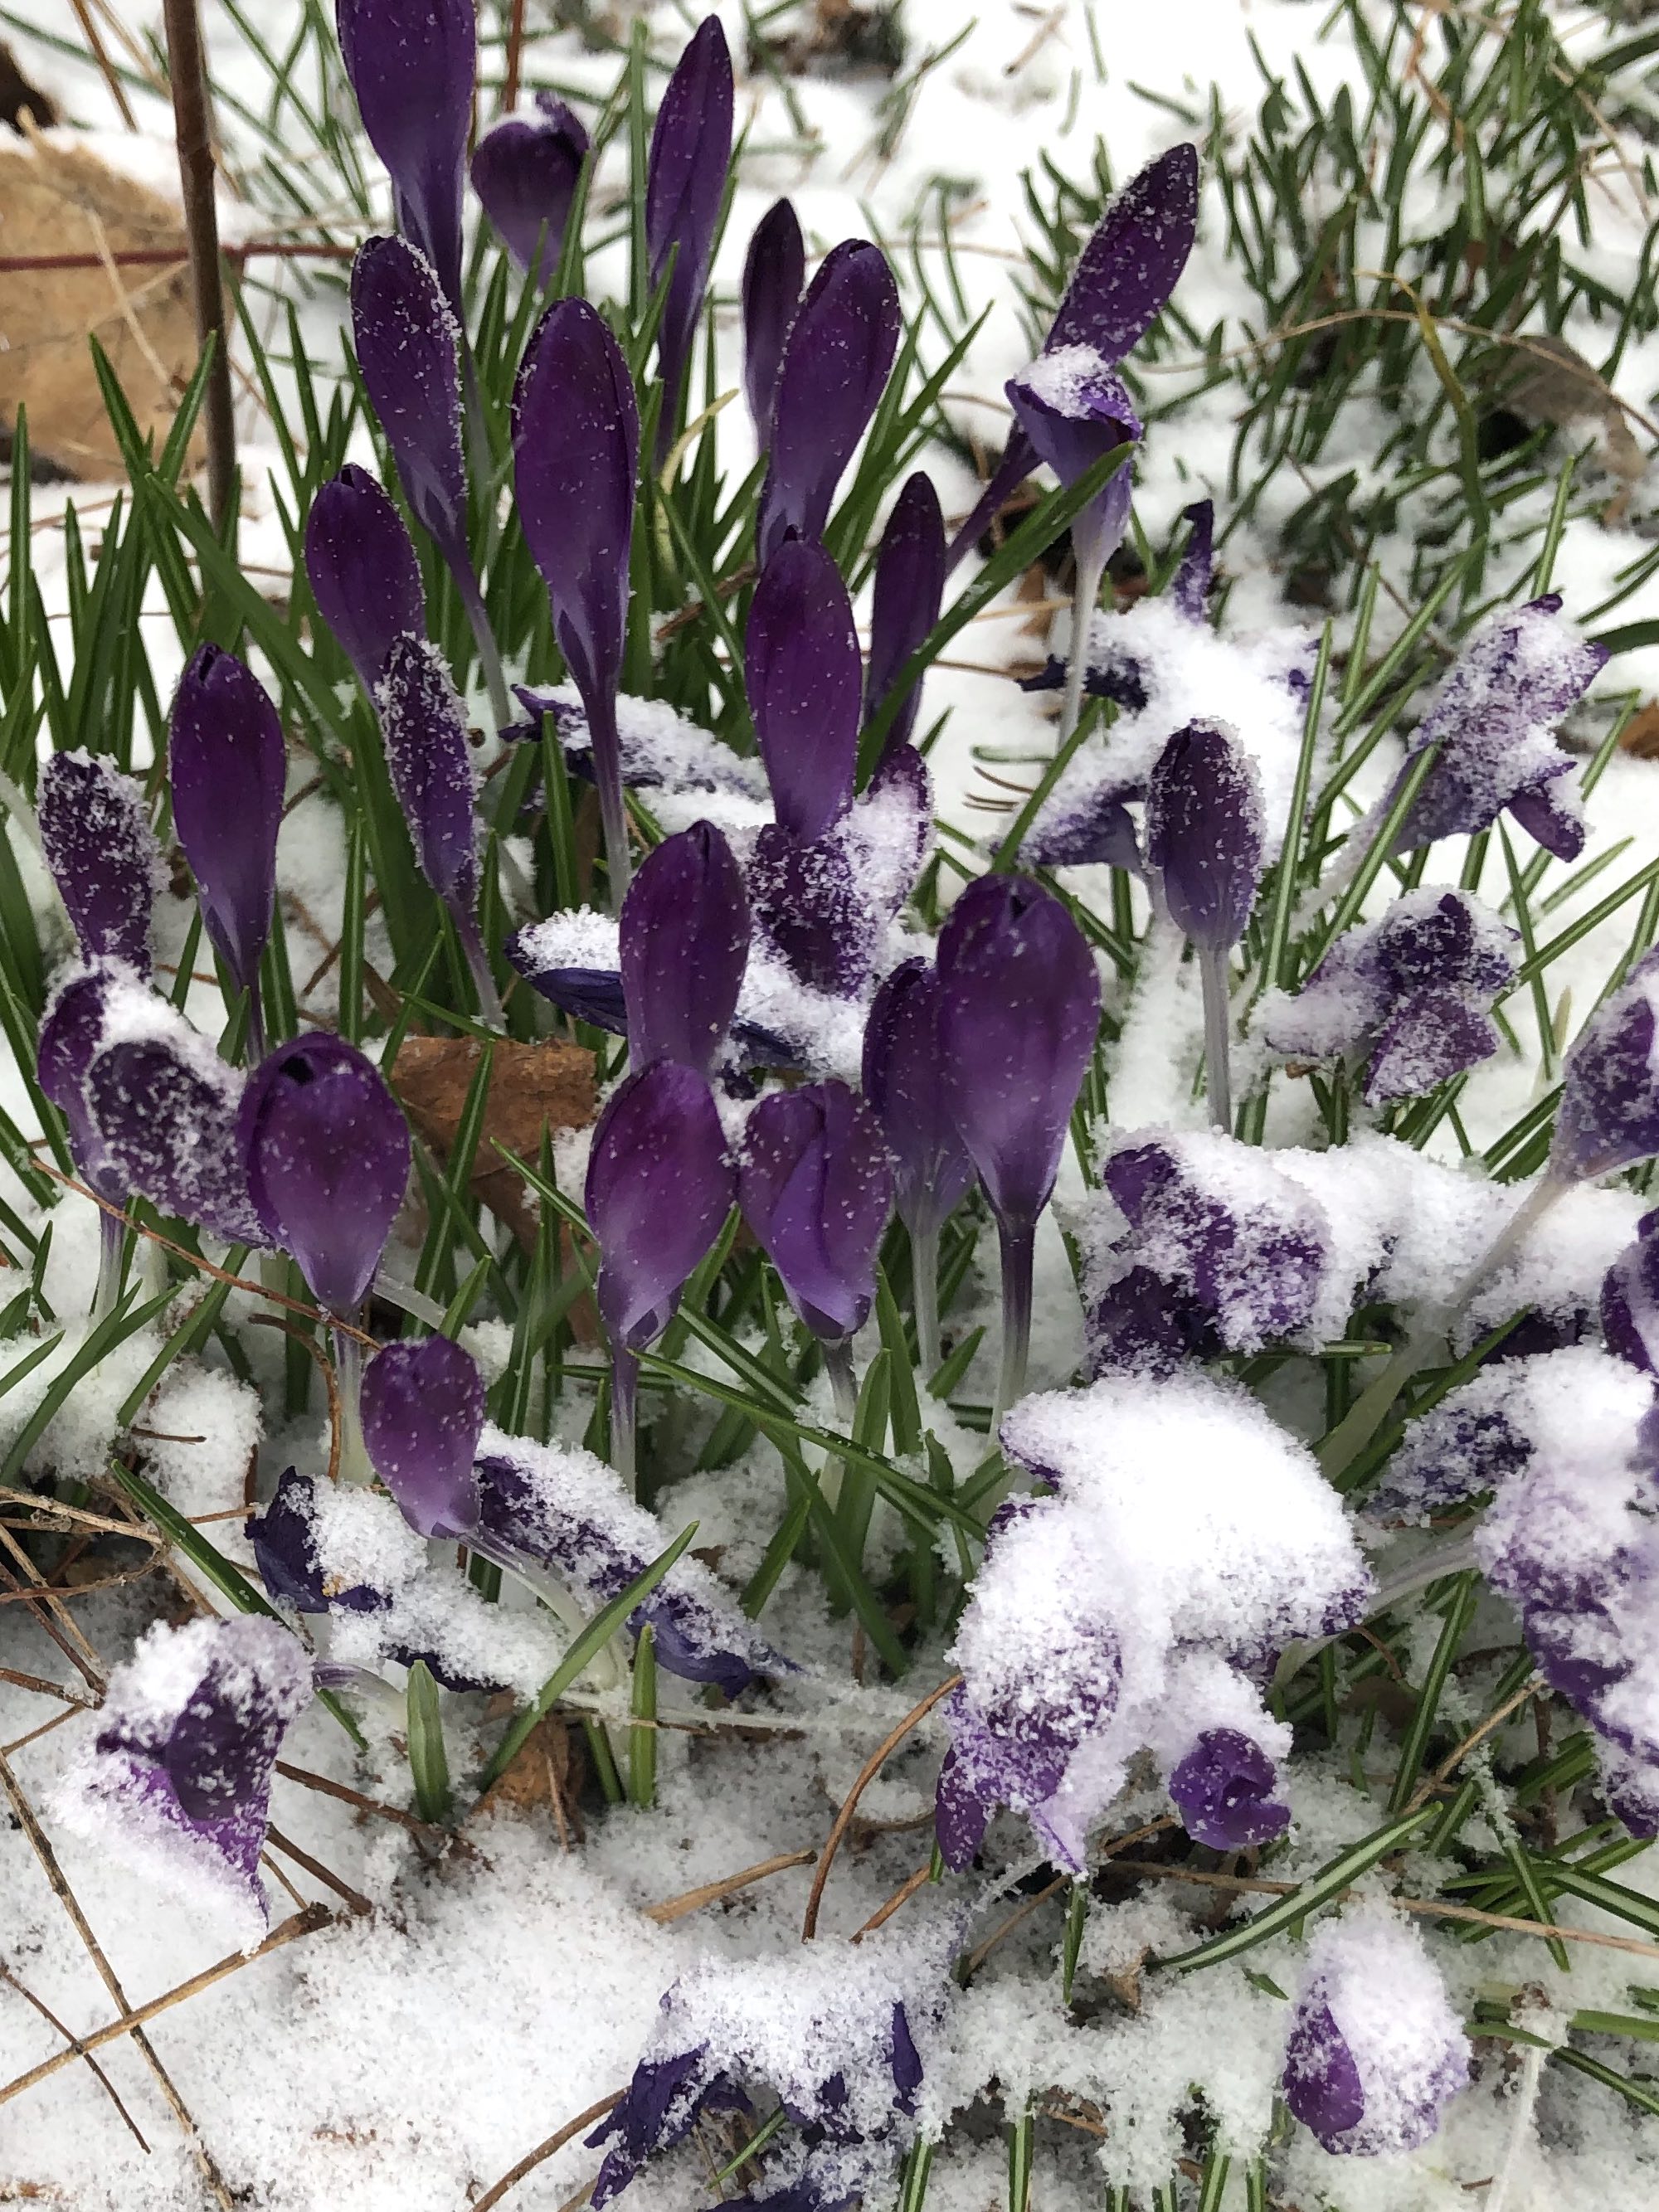 Crocus next to Thoreau Elementary wall on March 15, 2021.